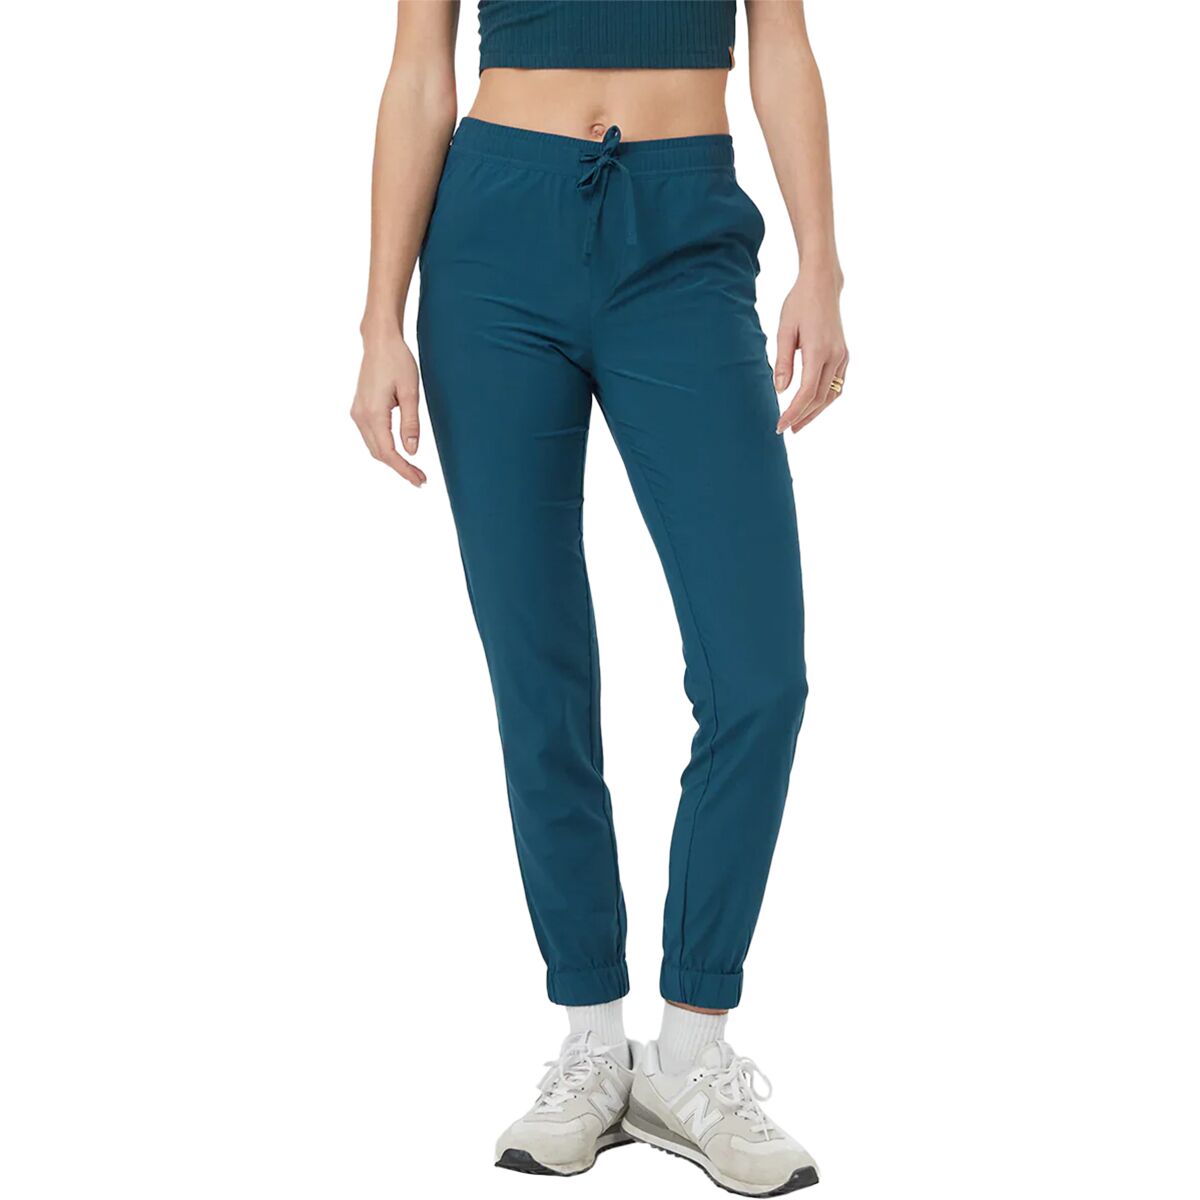 inMotion Pacific Jogger - Women